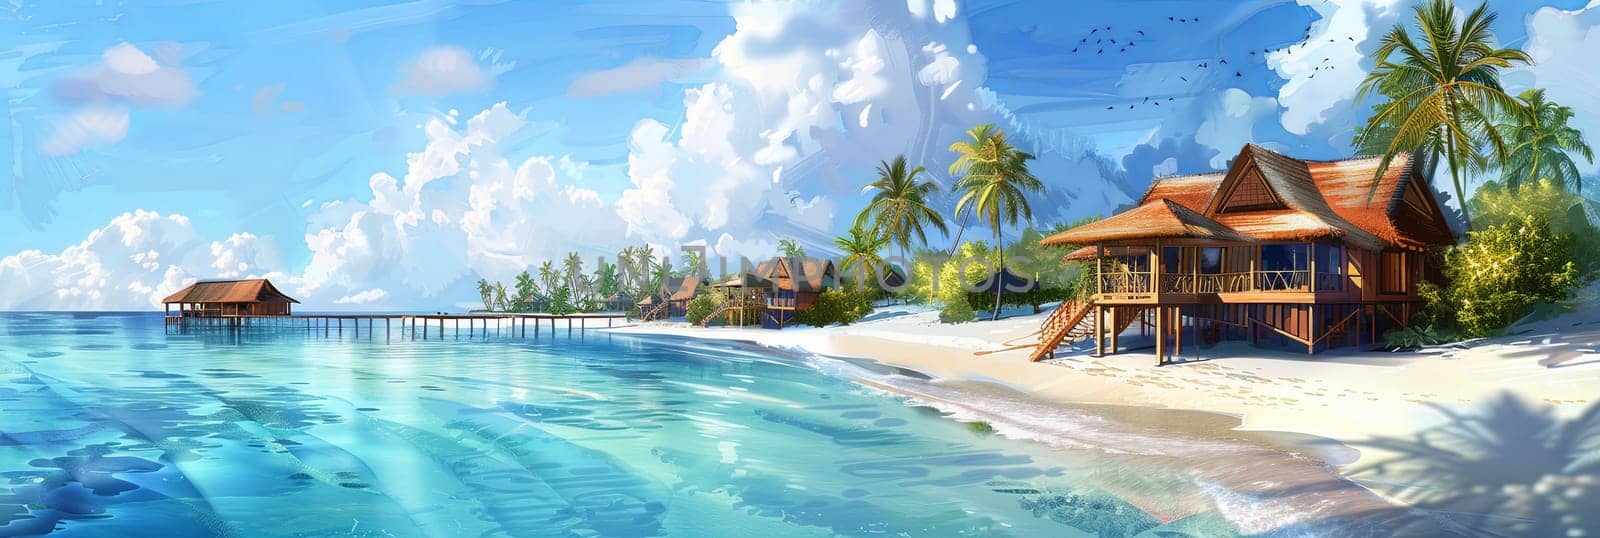 A painting showcasing a tropical beach setting with a hut under palm trees, white sand, and turquoise waters.